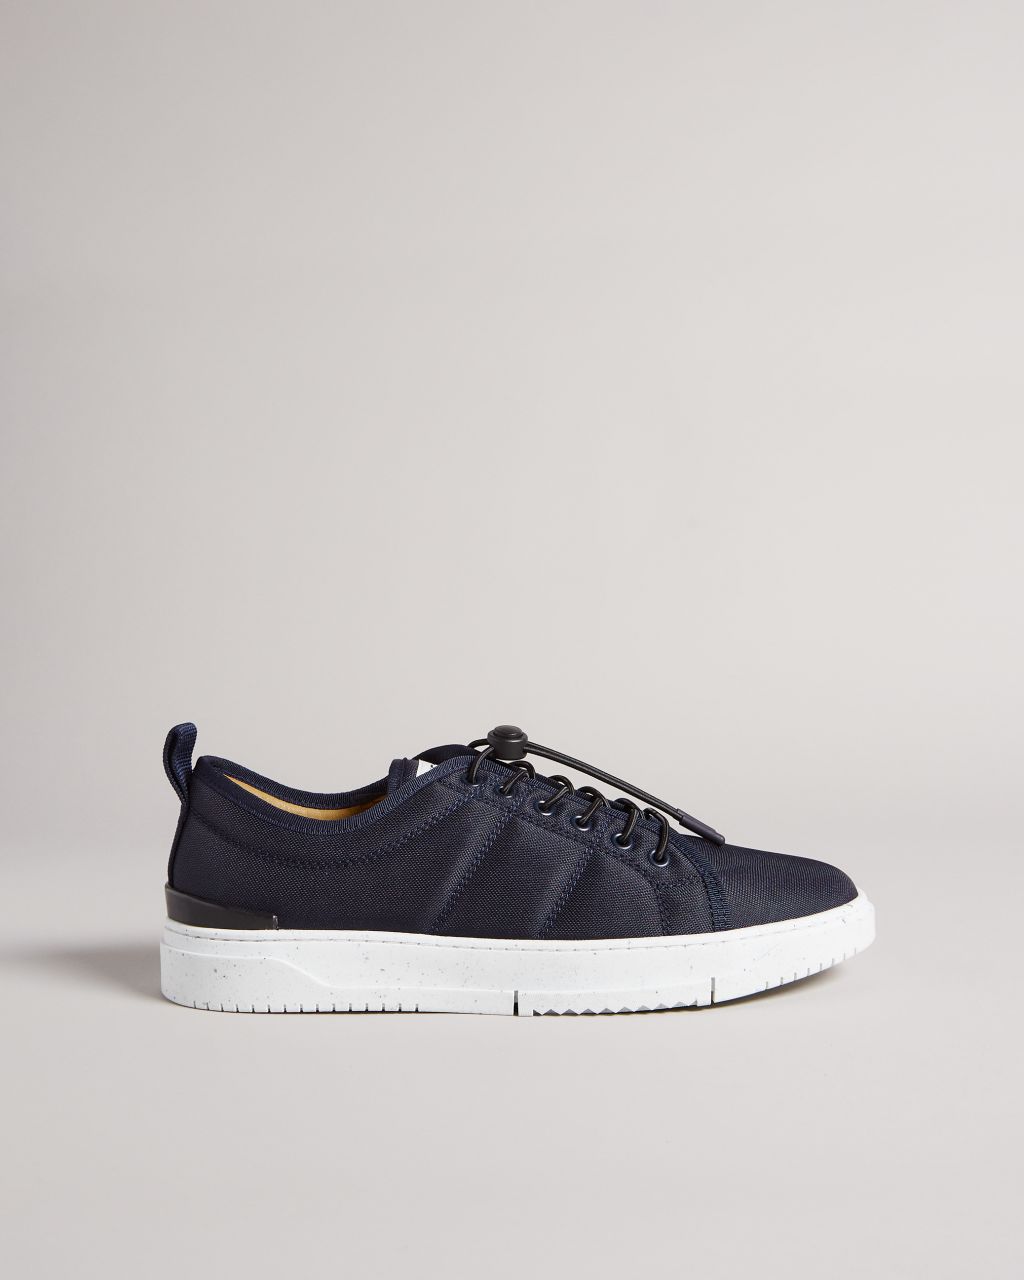 Ted Baker Men's Recycled Nylon Low Top Trainers in Navy, Oliiver